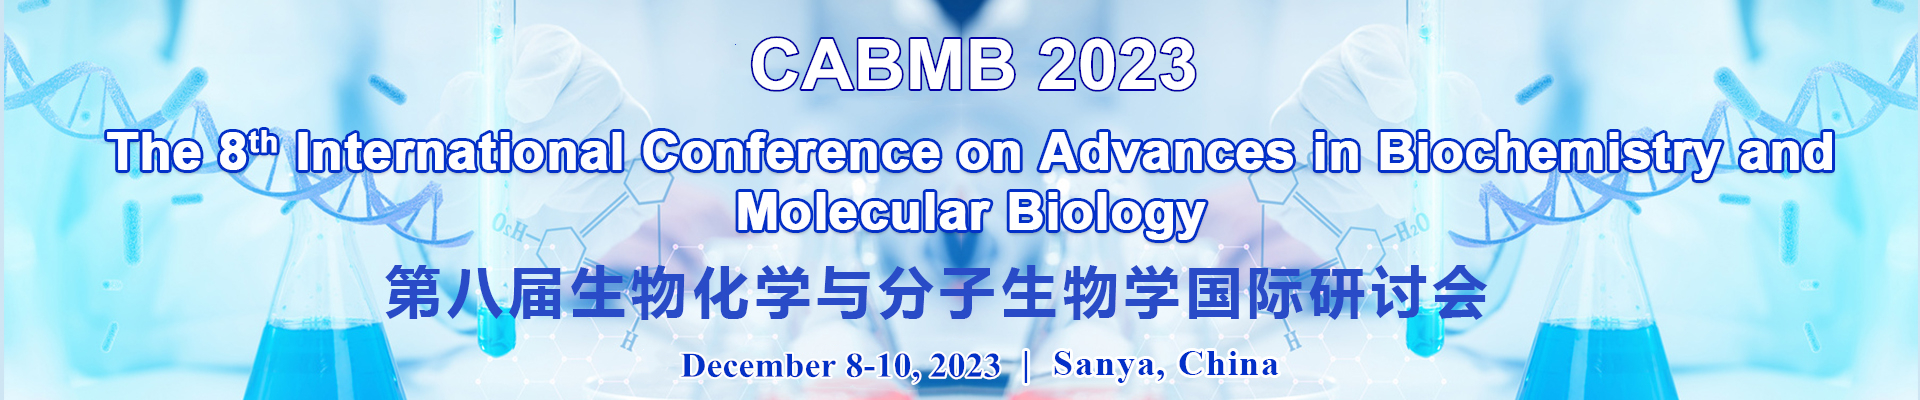 The 8th International Conference on Advances in Biochemistry and Molecular Biology (CABMB 2023), Sanya, Hainan, China